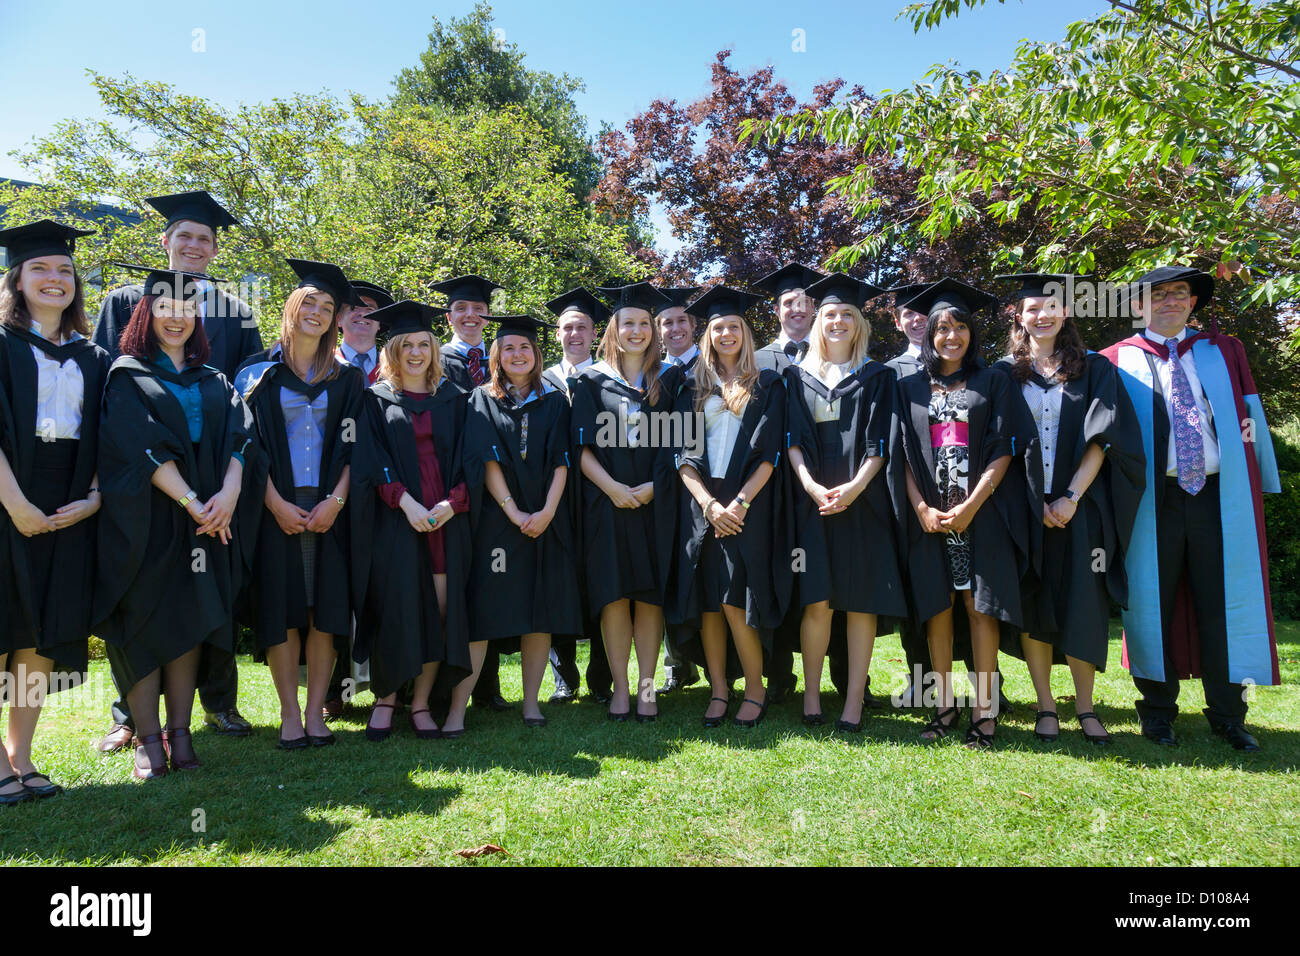 Graduates and their lecturers from the Engineering School of the University of Southampton, England, assemble for a group photo. Stock Photo